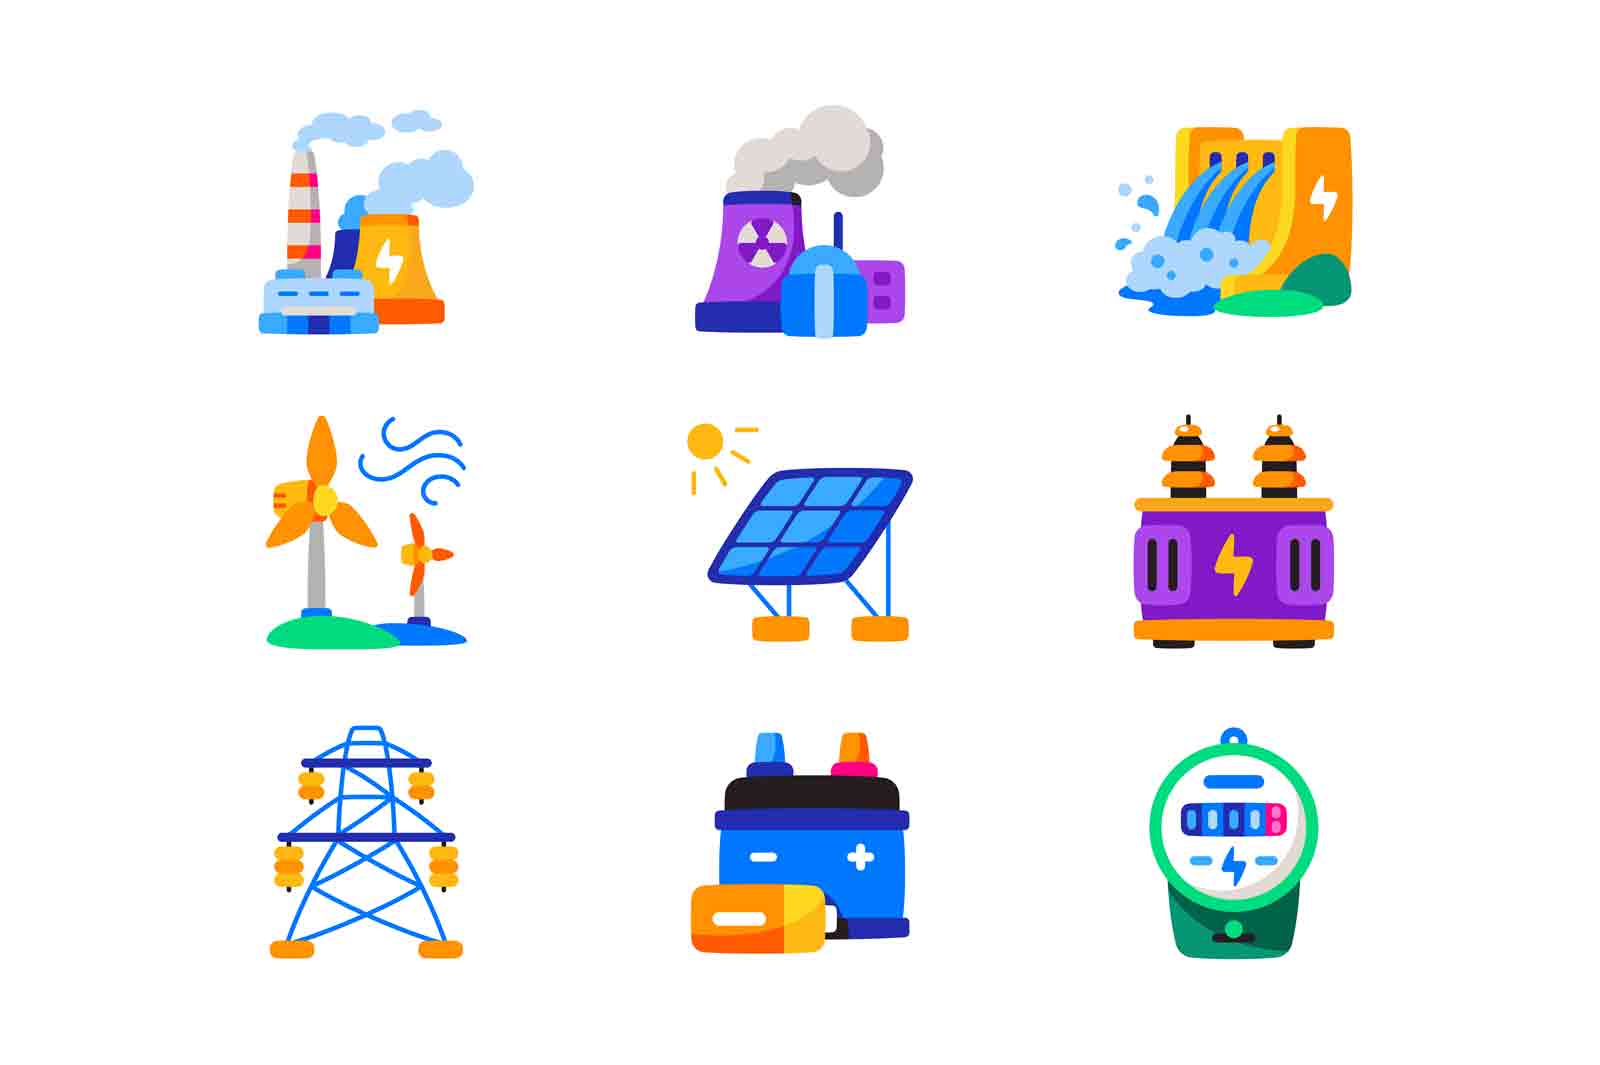 Electricity generation and distribution vector icons set. Energy production and renewable energy concept.